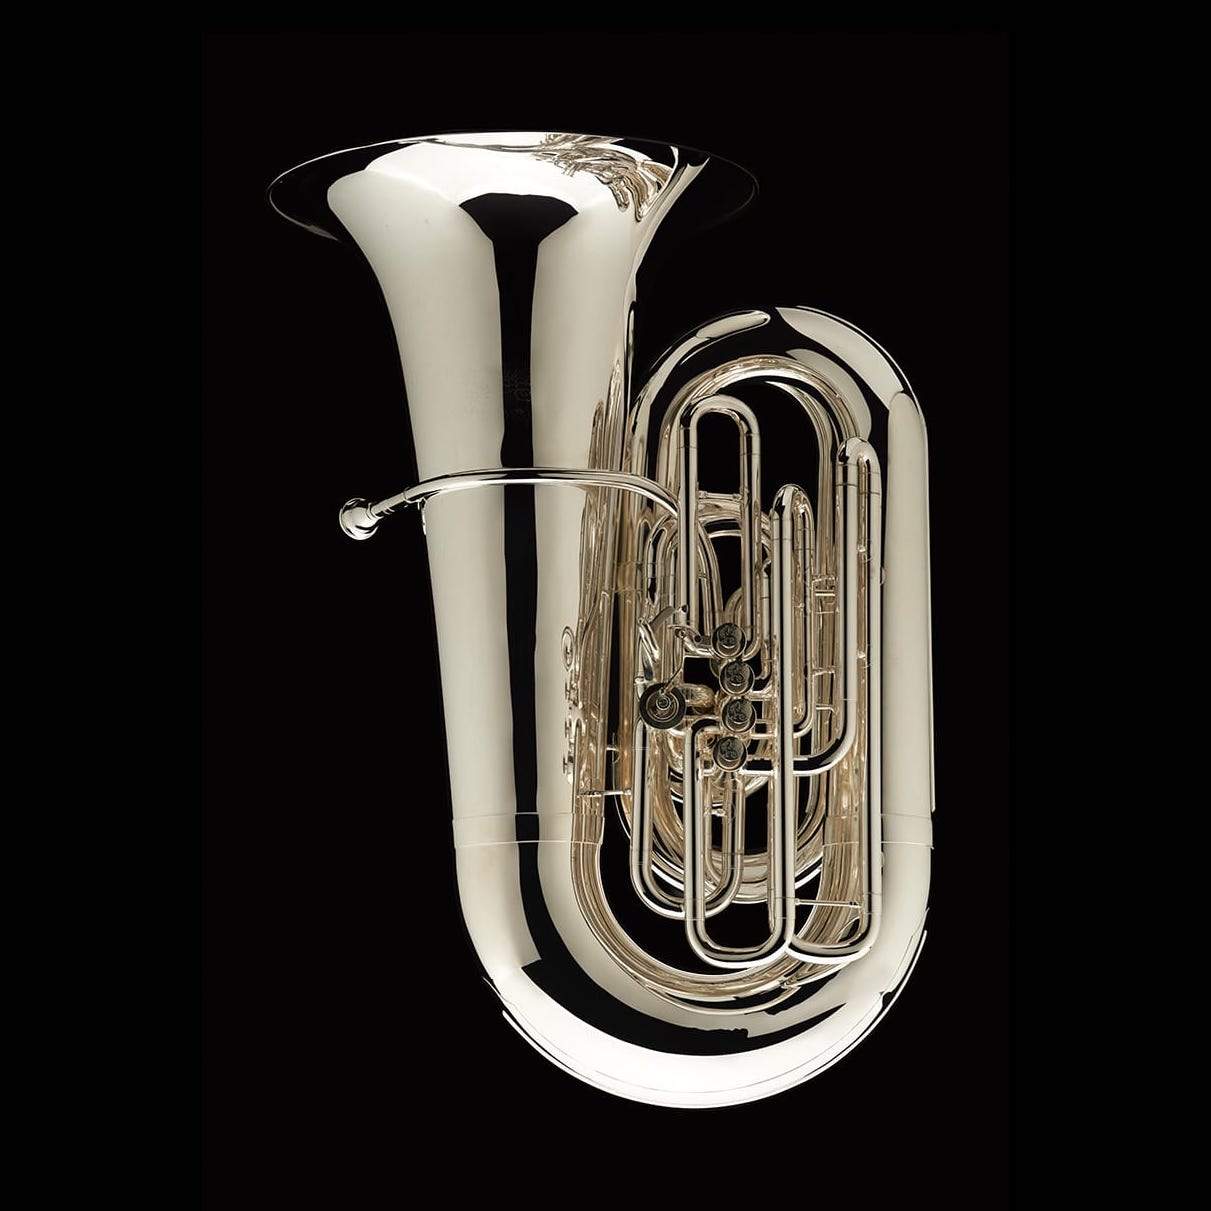 An image of a BBb 6/4 Tuba with 5-valves 'Prokofiev' in silver plate from Wessex Tubas